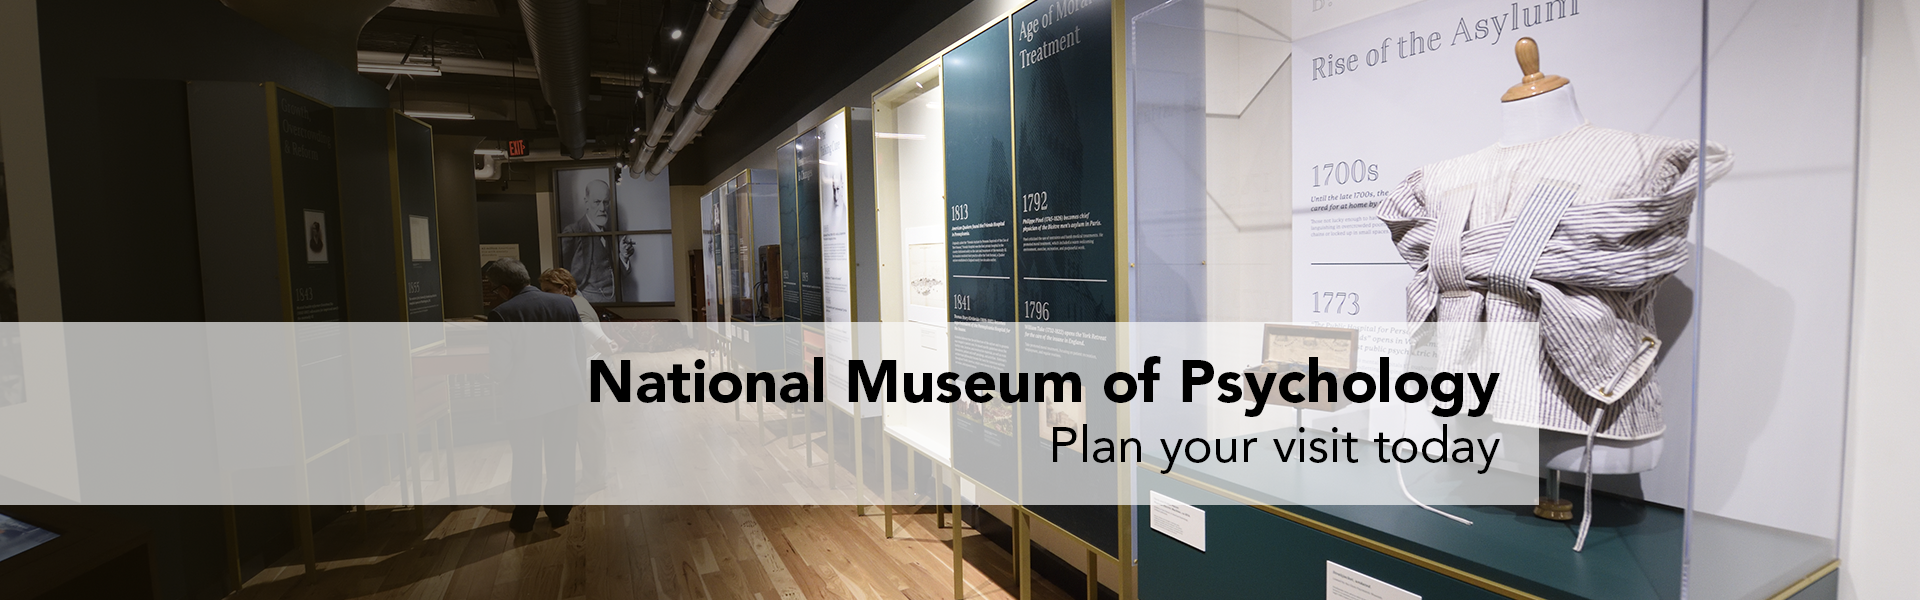 National Museum of Psychology